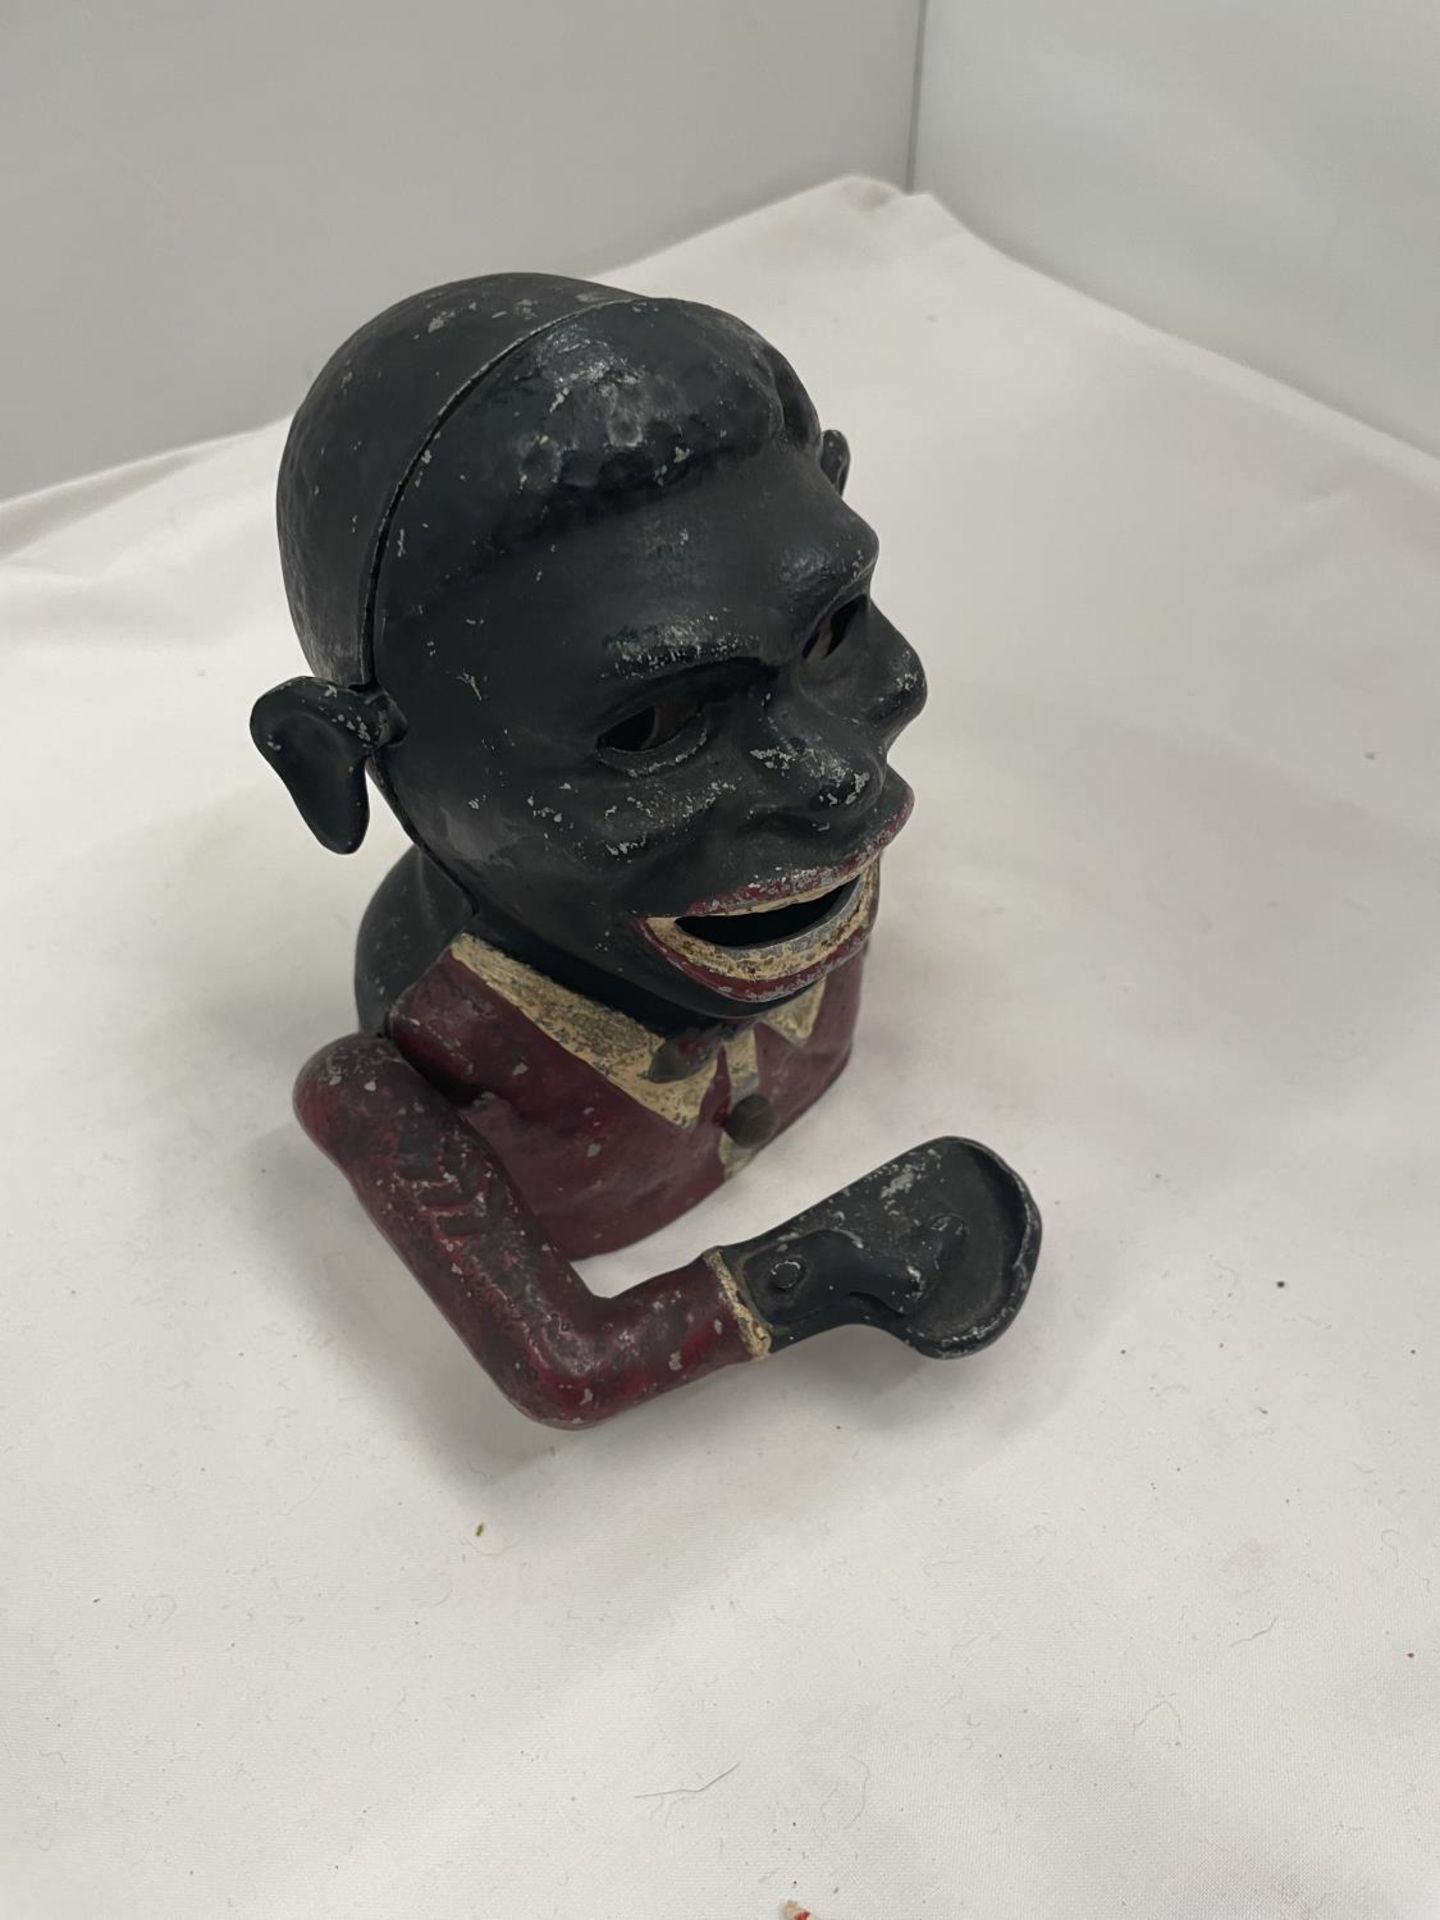 A VINTAGE 'JOLLY MAN' MONEY BOX IN WORKING ORDER - Image 2 of 3